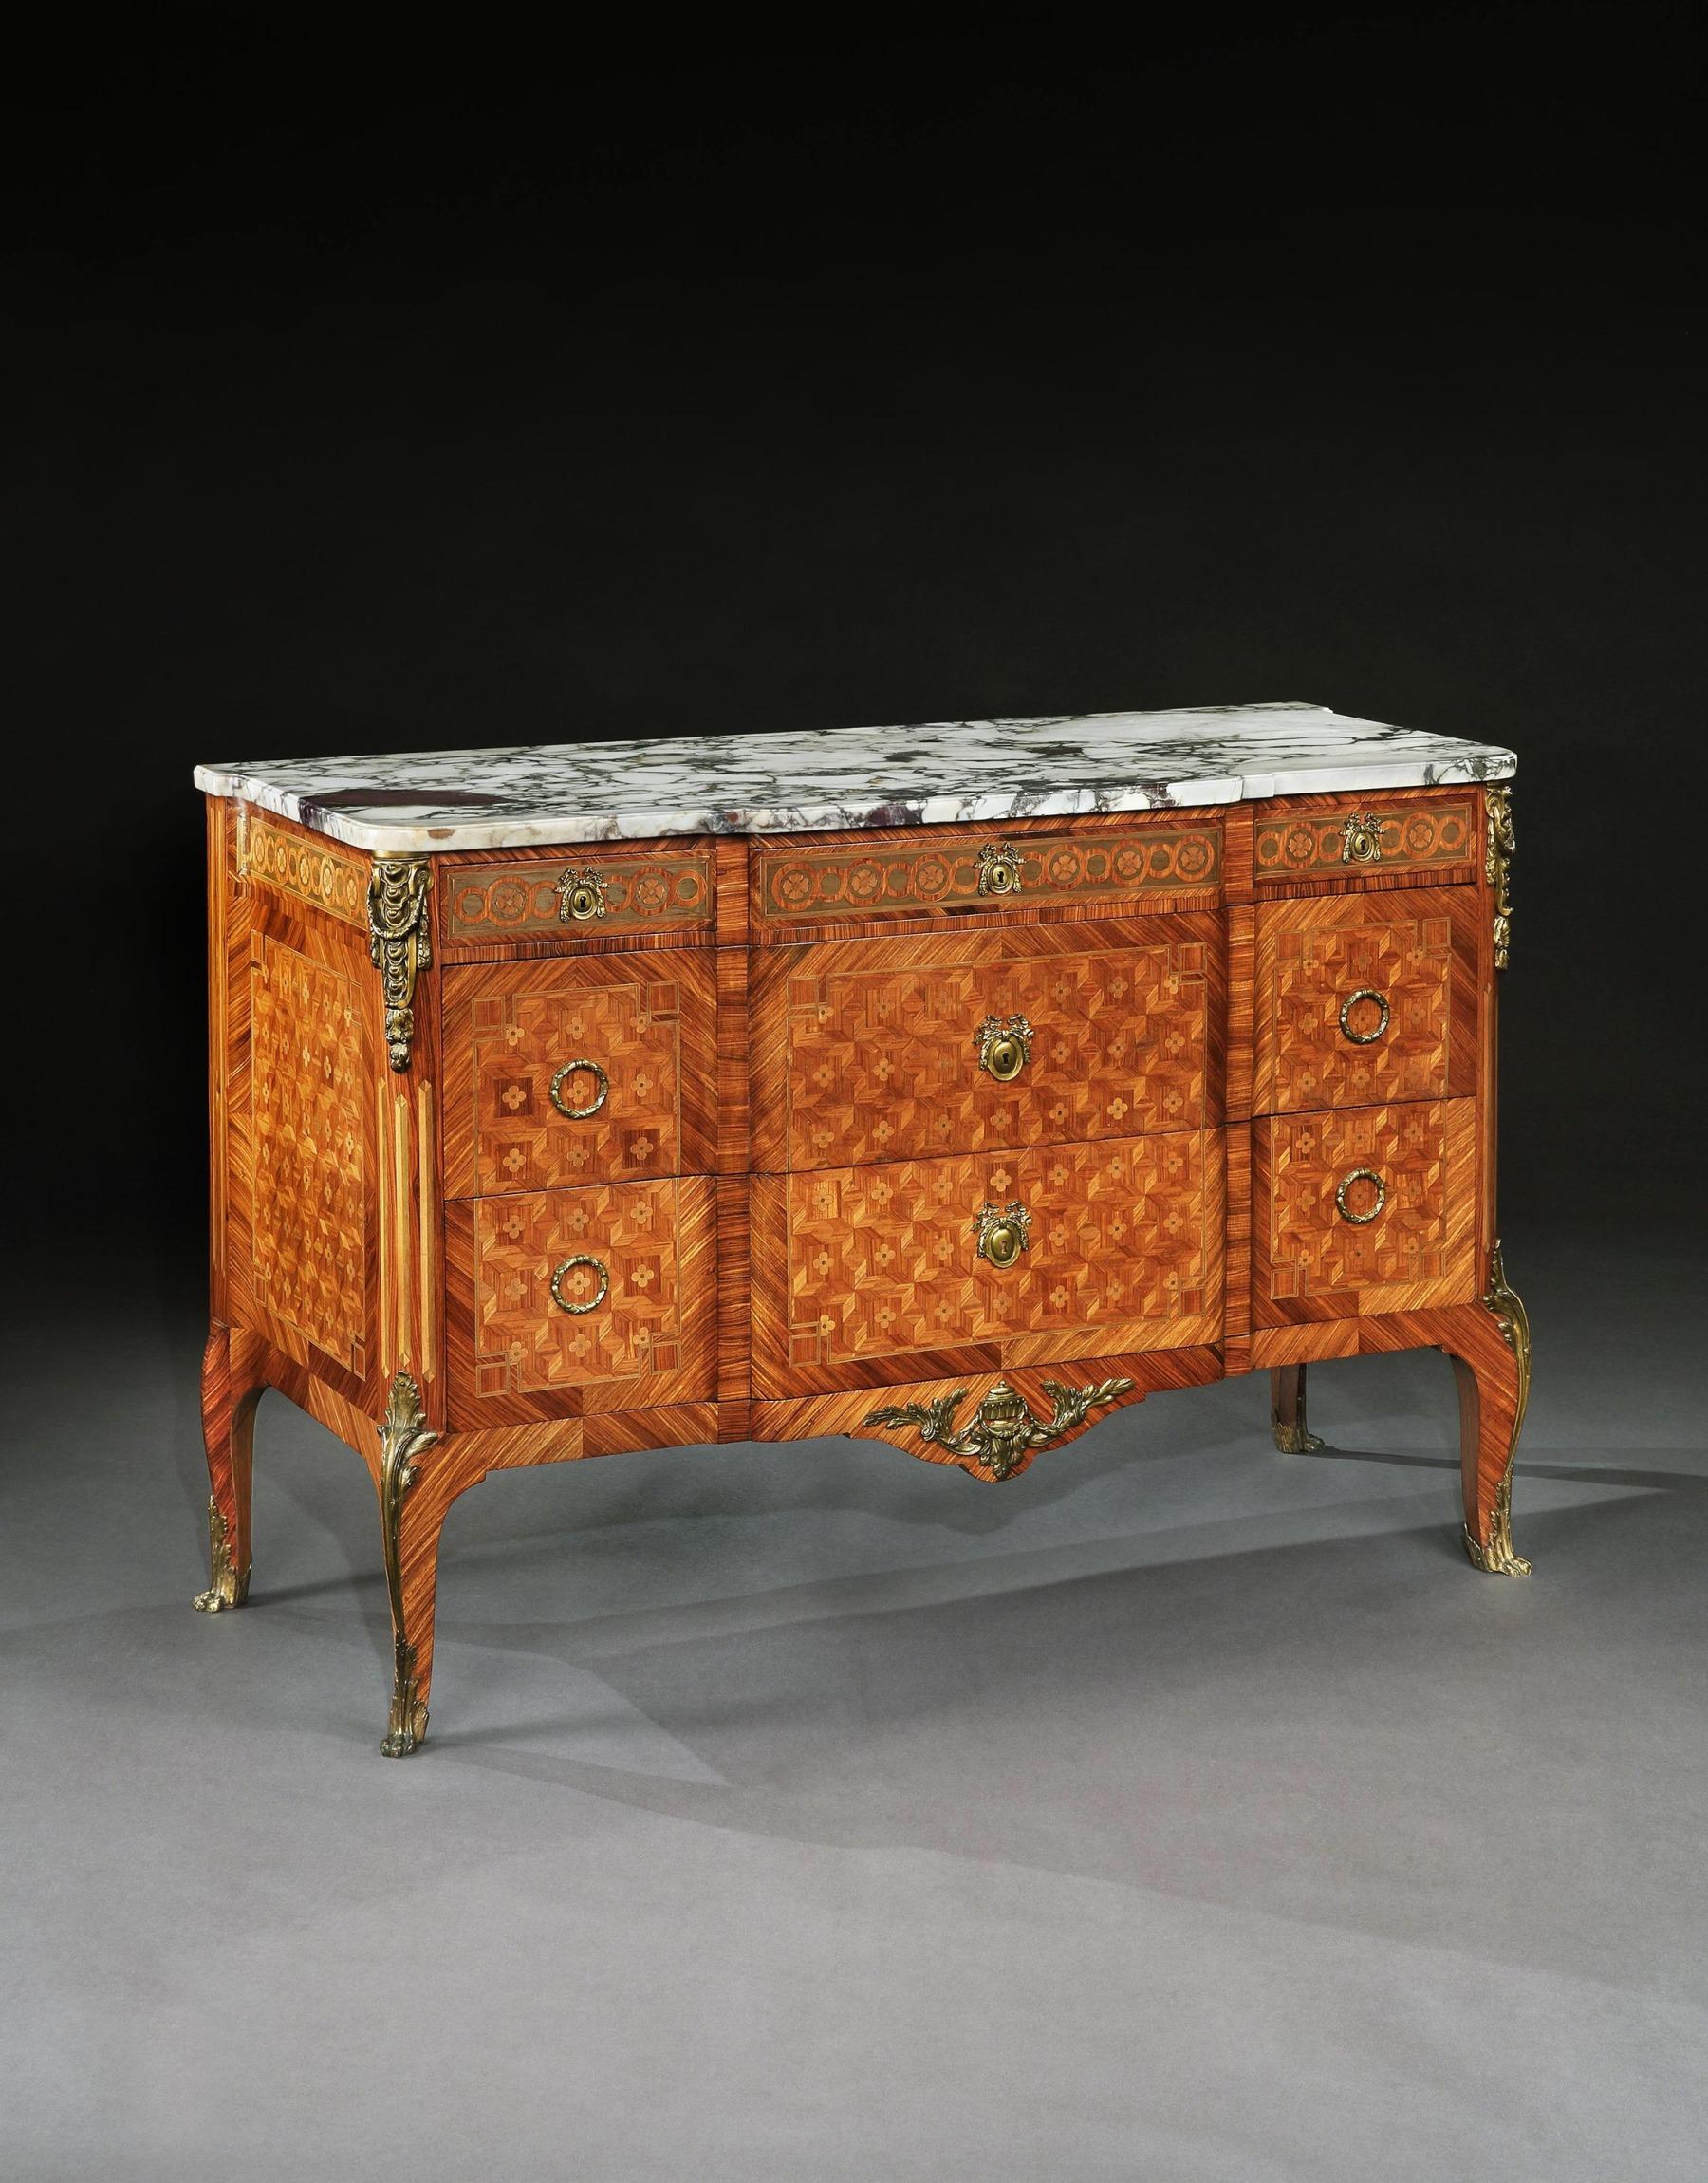 An outstanding gilt bronze-mounted tulipwood, kingwood and sycamore parquetry breakfronted breche violet marble topped commode, in French Transitional style dating to the late 19th-early 20th century.

French, circa 1880-1900.

Of superb